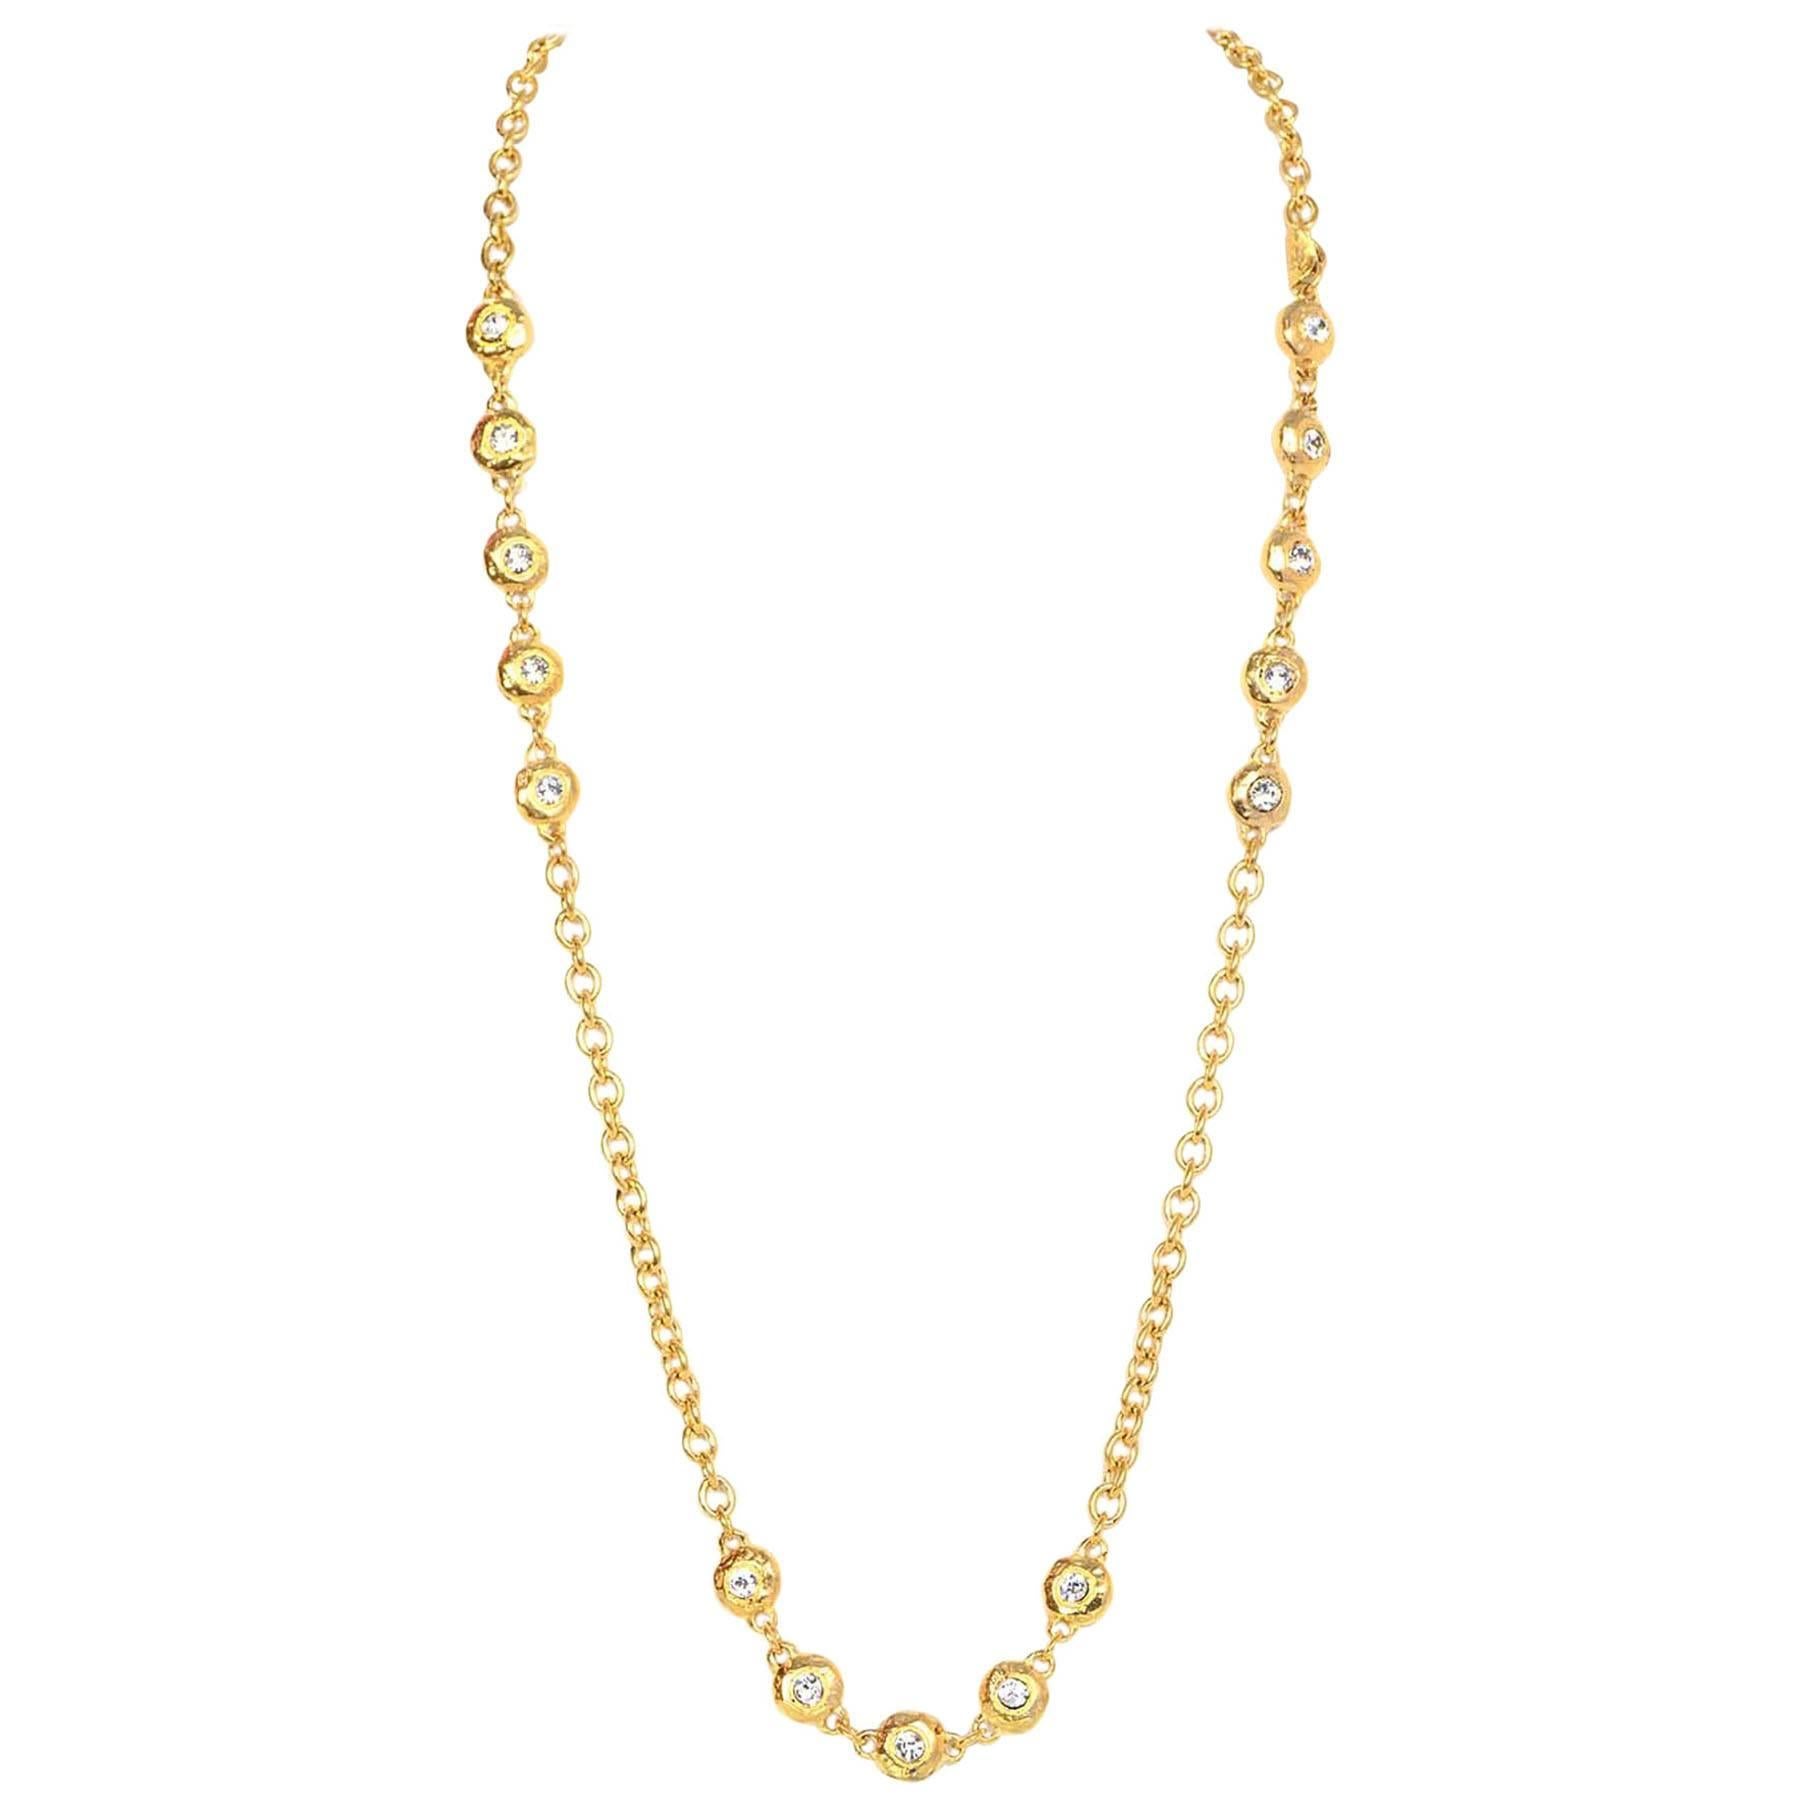 100% Authentic Chanel Chanel Vintage 36" Chain-link Crystal Necklace. Features bright goldtone metal with five clear crystals in between chain throughout. Necklace can be worn long or doubled.

 **Please necklace has been re-dipped to appear a